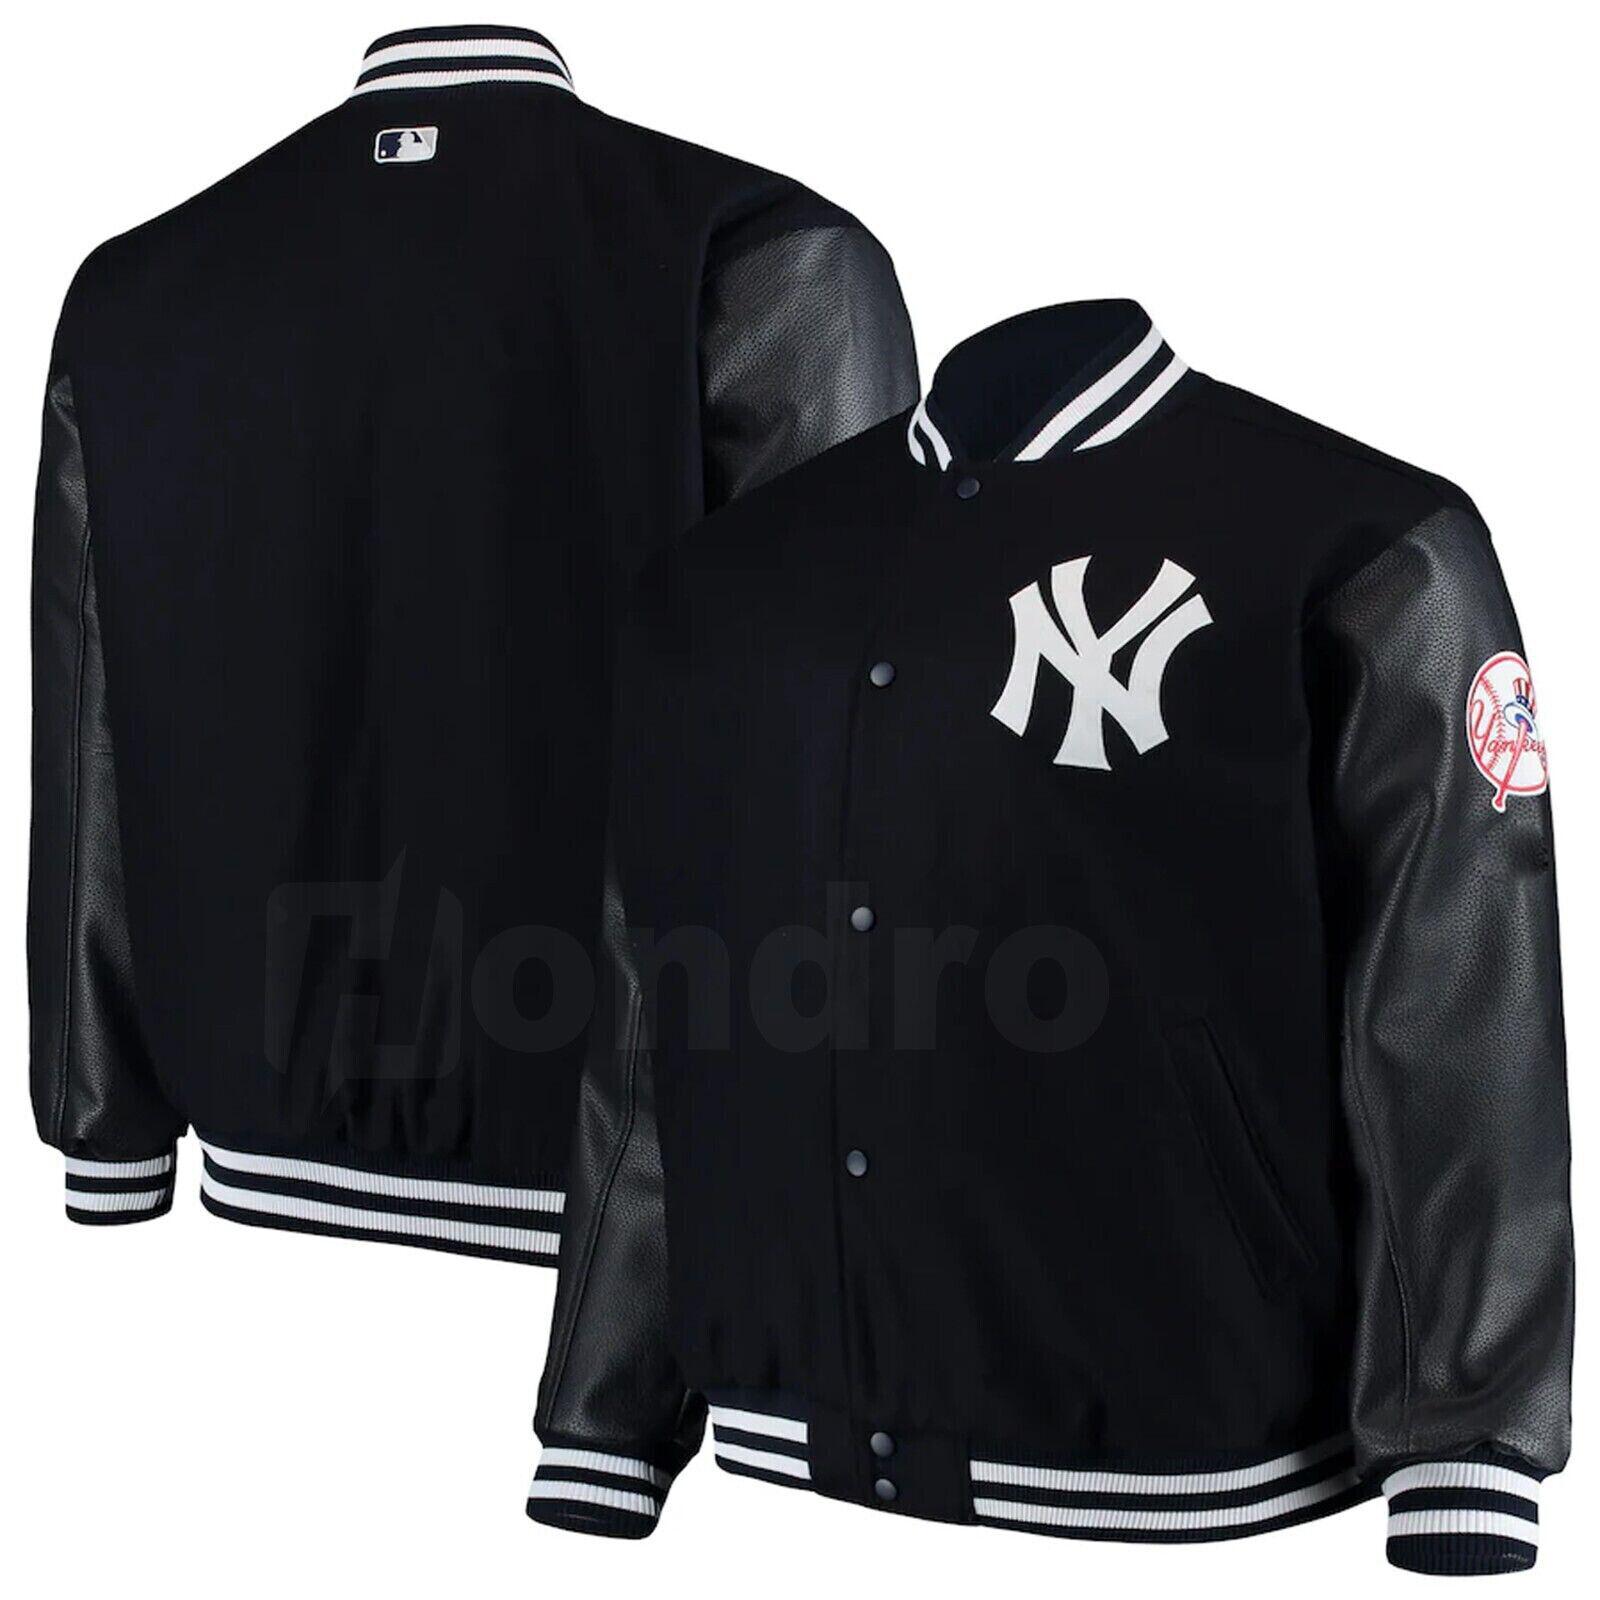 New York Yankees Black Wool & Leather Jacket Full Snap Embroidery logos